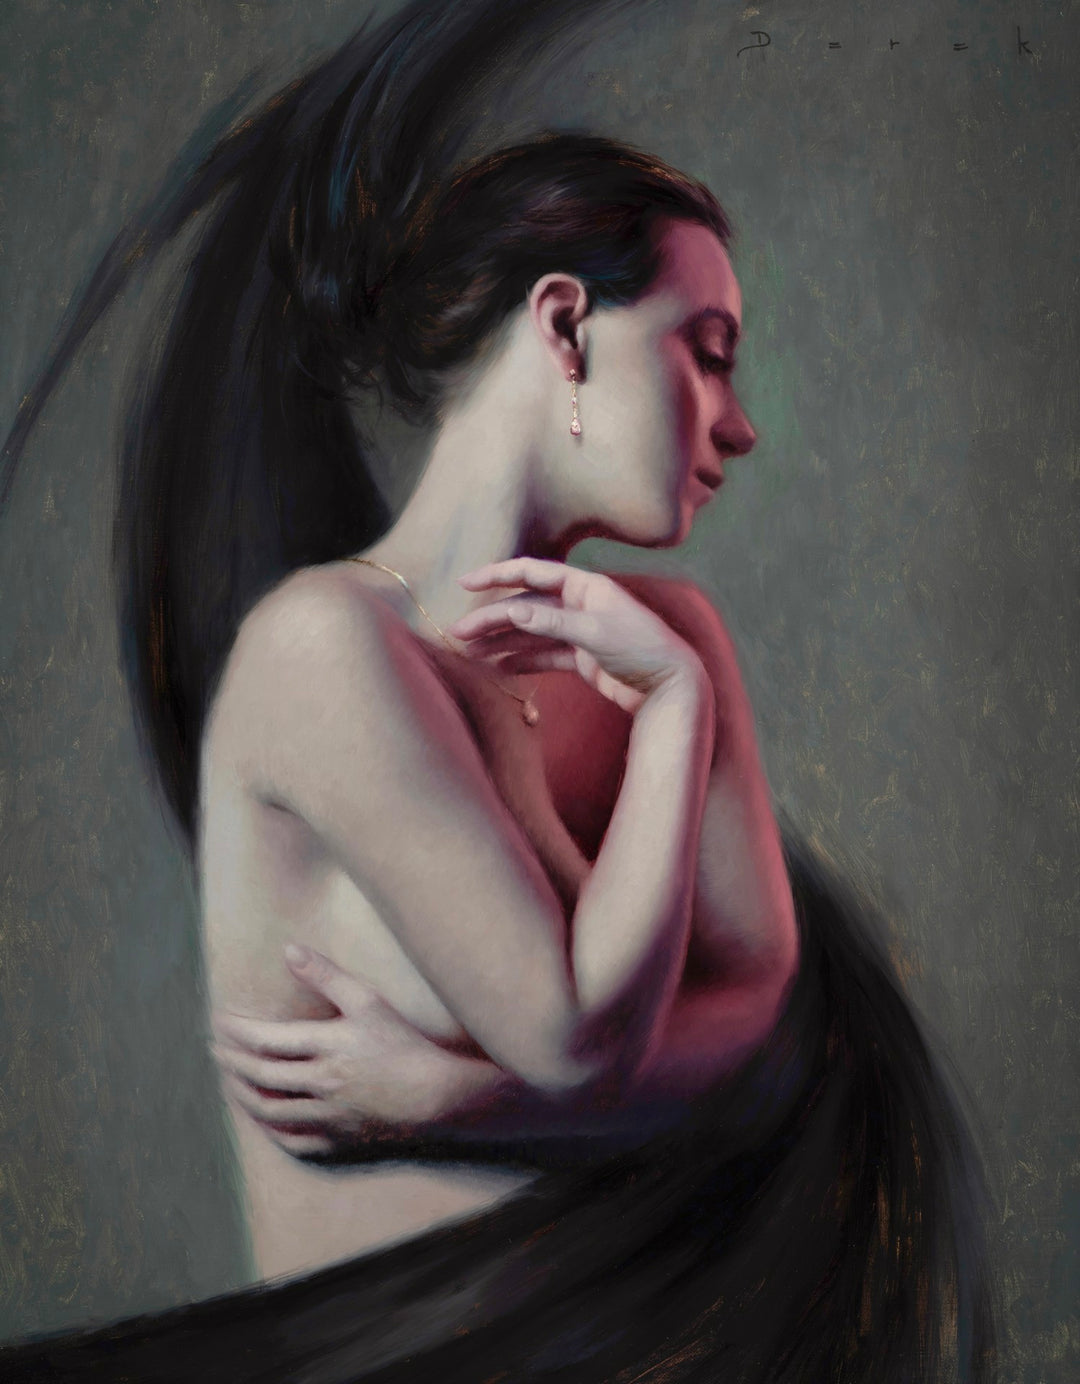 A mesmerizing Derek Harrison - "Rosé" oil on linen painting featuring a captivating and sensuous woman with luscious black hair.